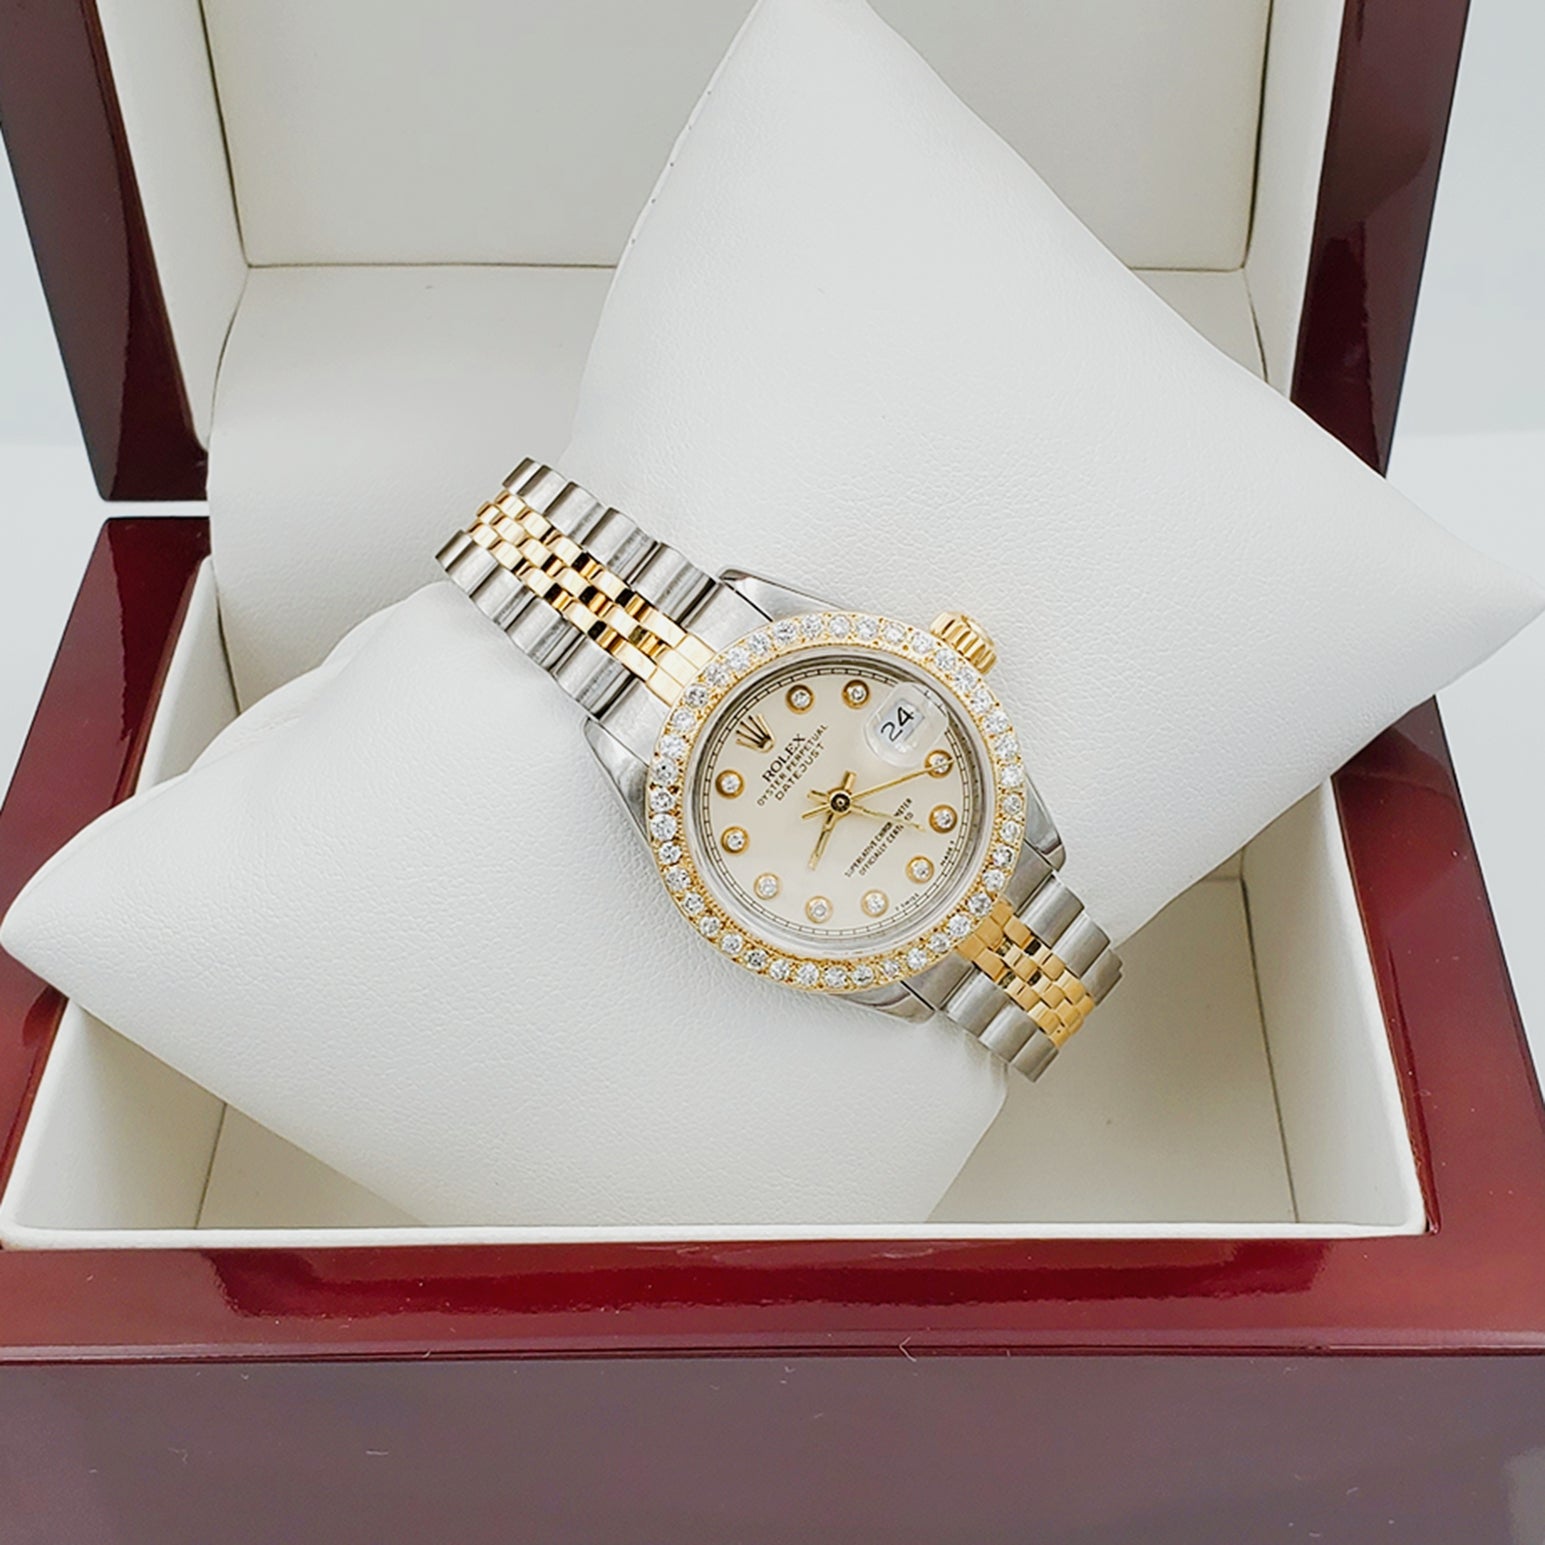 Ladies Rolex 26mm DateJust 18K Gold / Two Tone Stainless Steel Watch with Beige Diamond Dial and Diamond Bezel. (Pre-Owned)